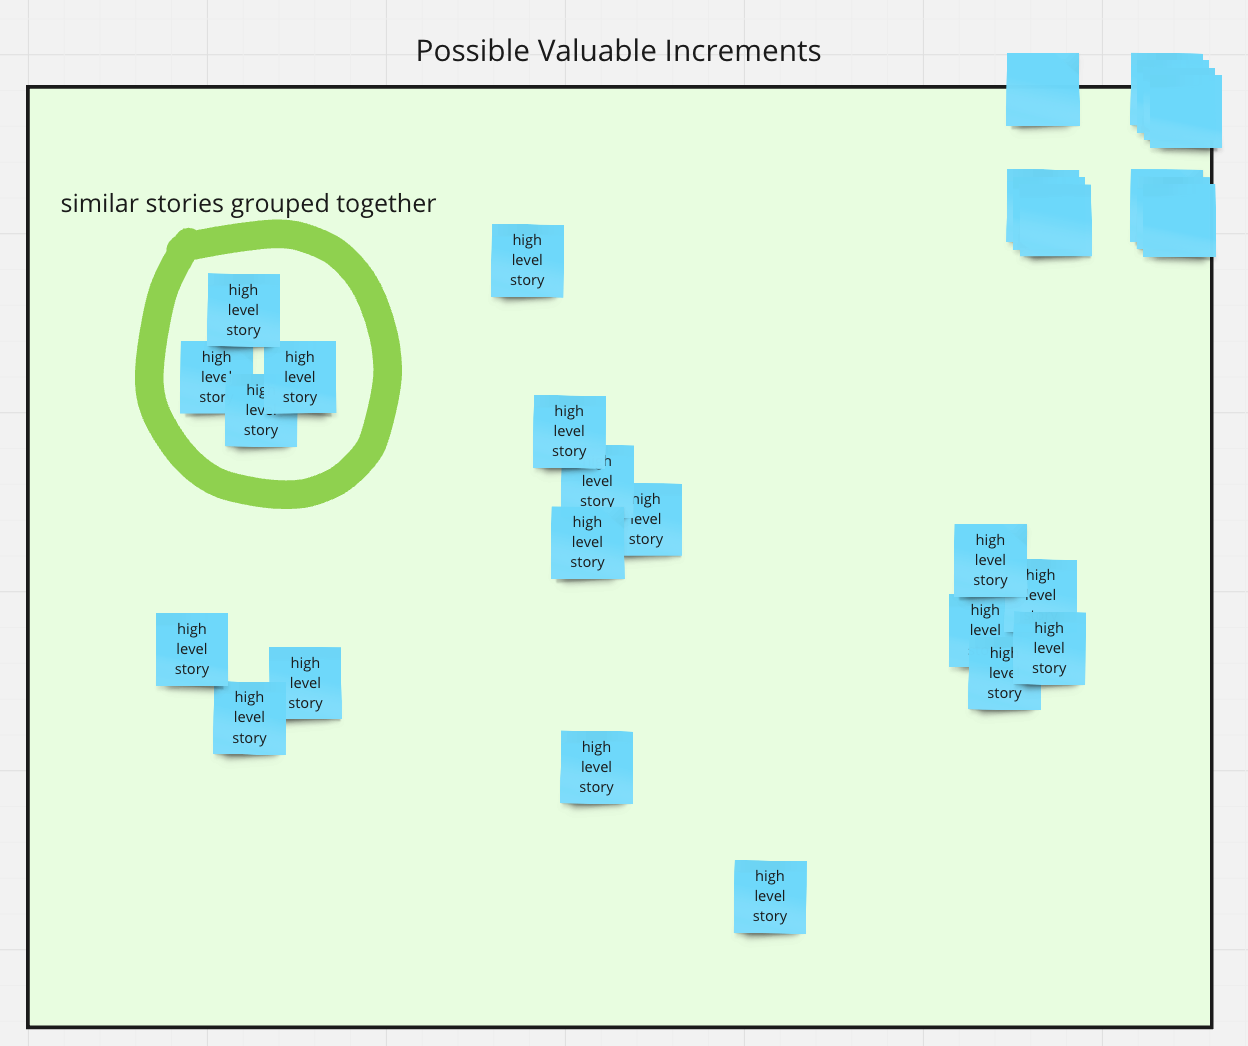 Possible Valuable Increments Clustered